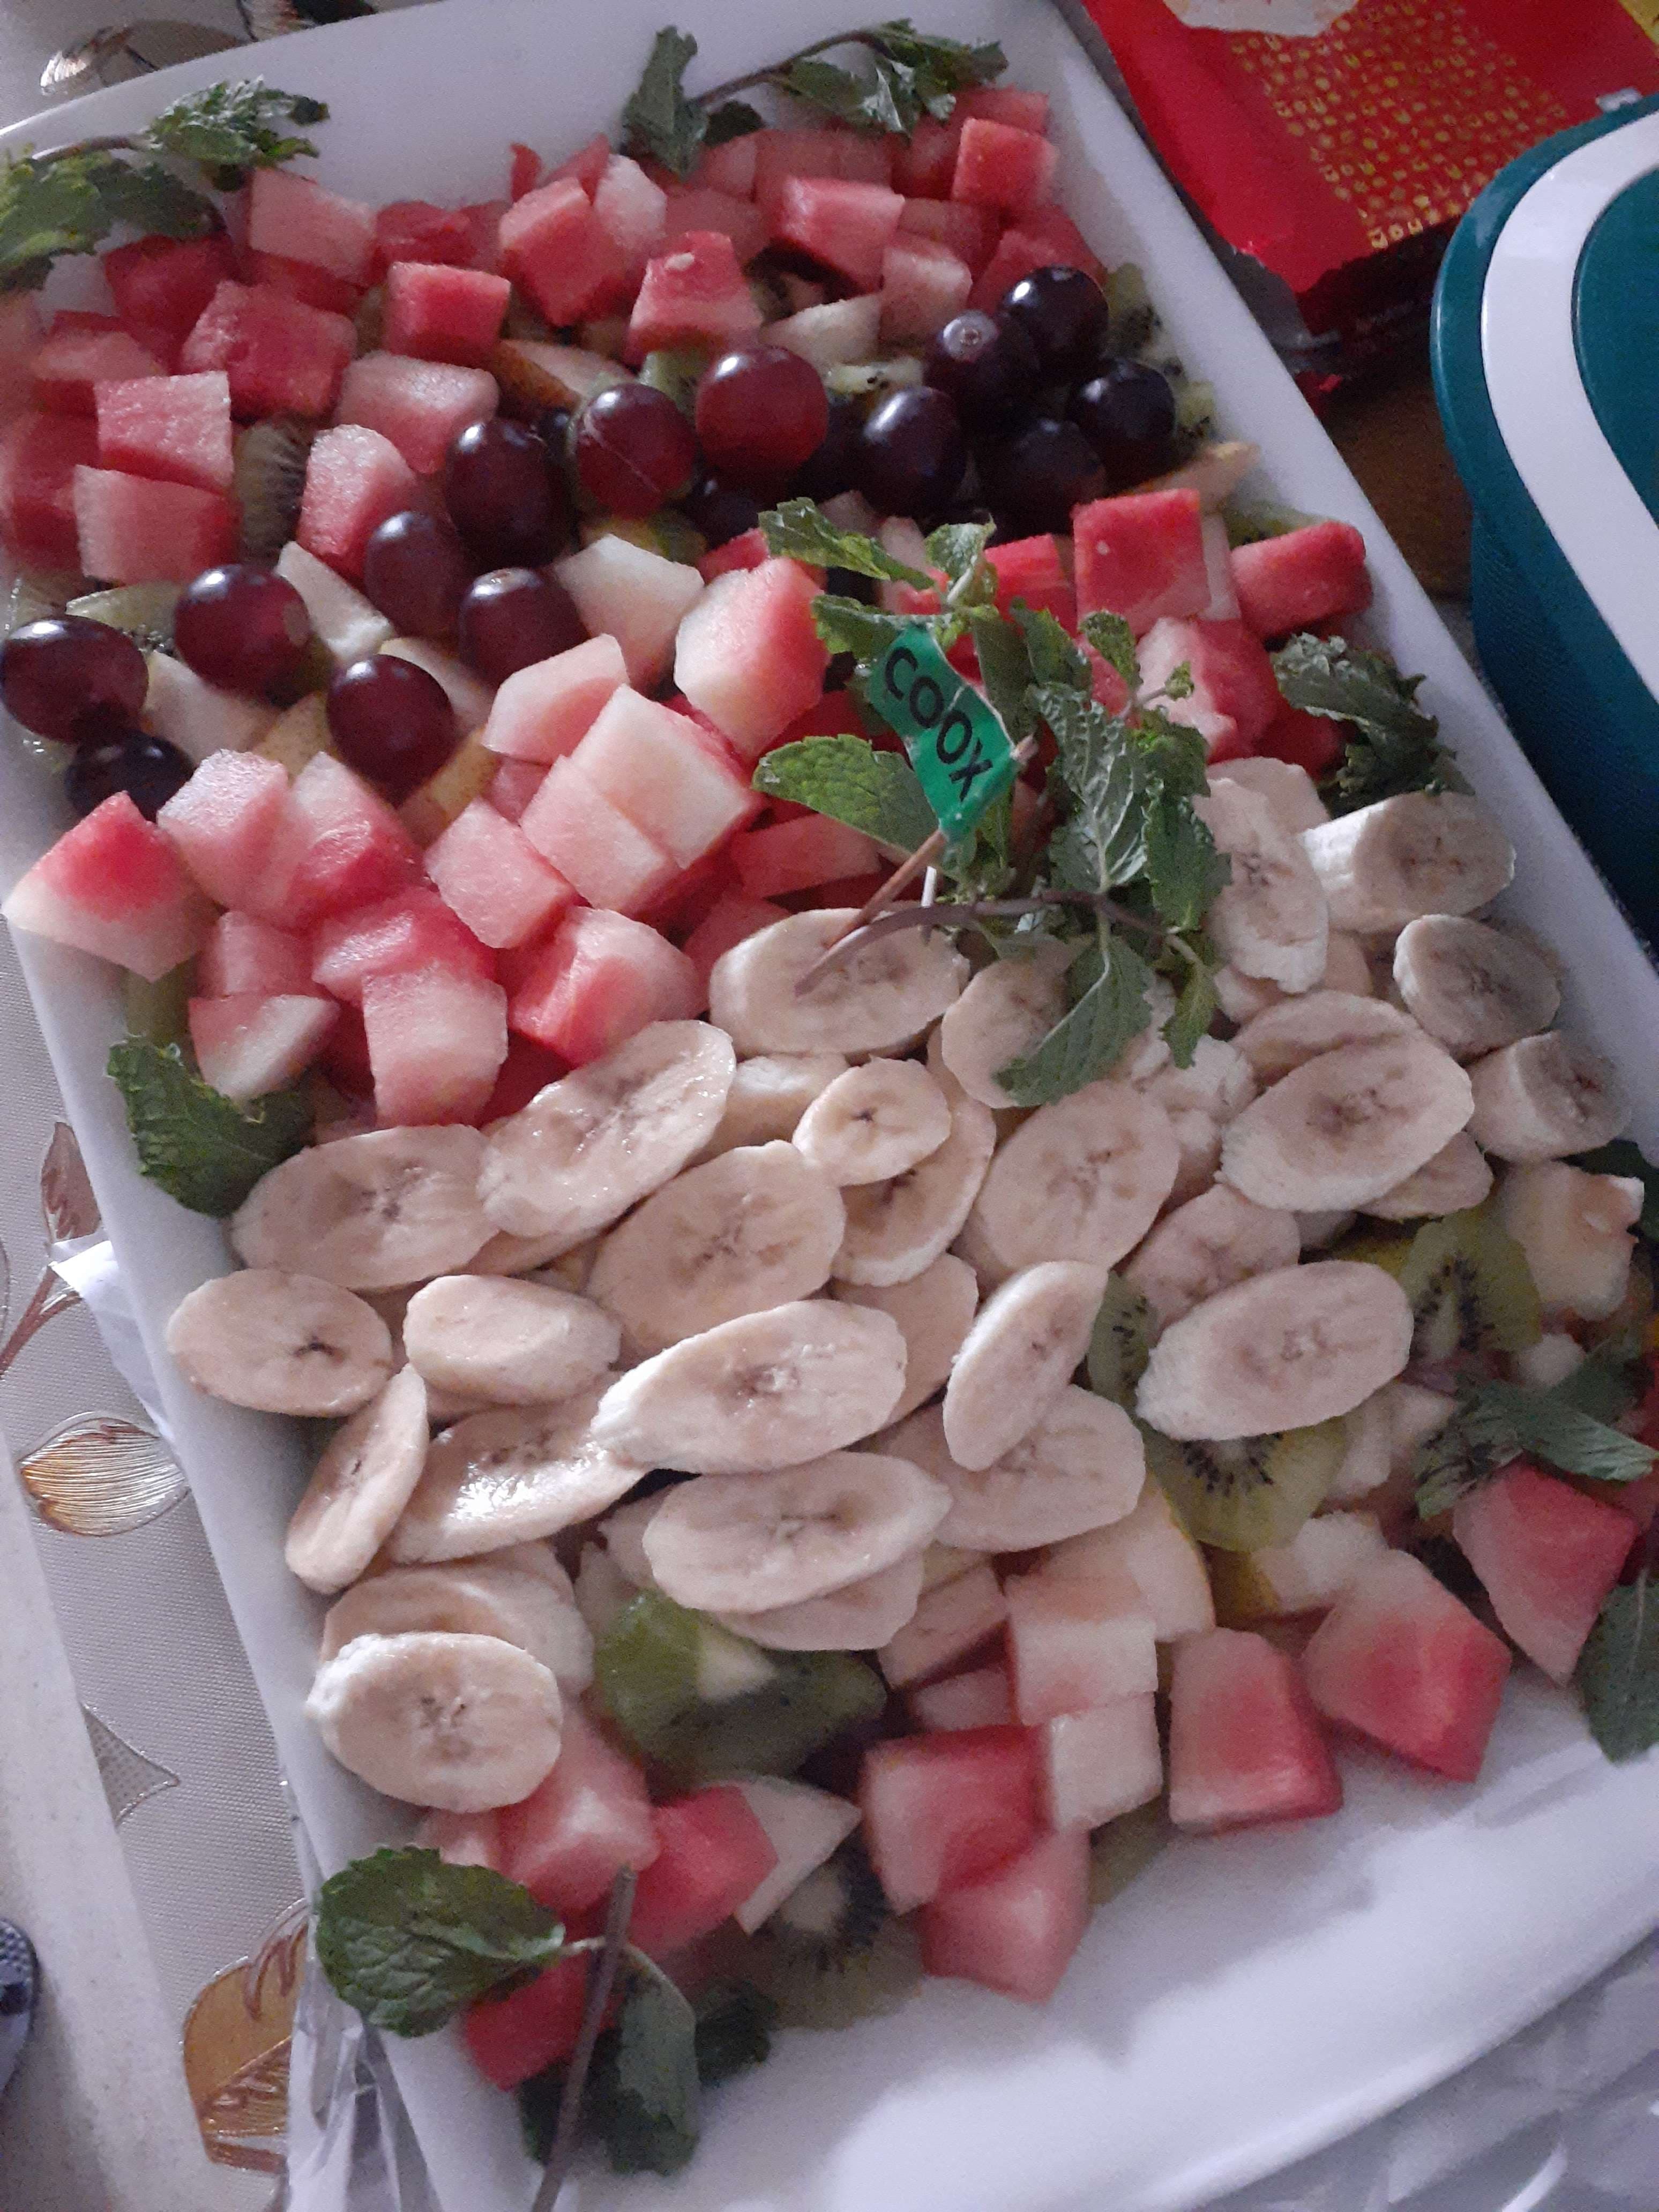 Delicious Fruit Salad prepared by COOX